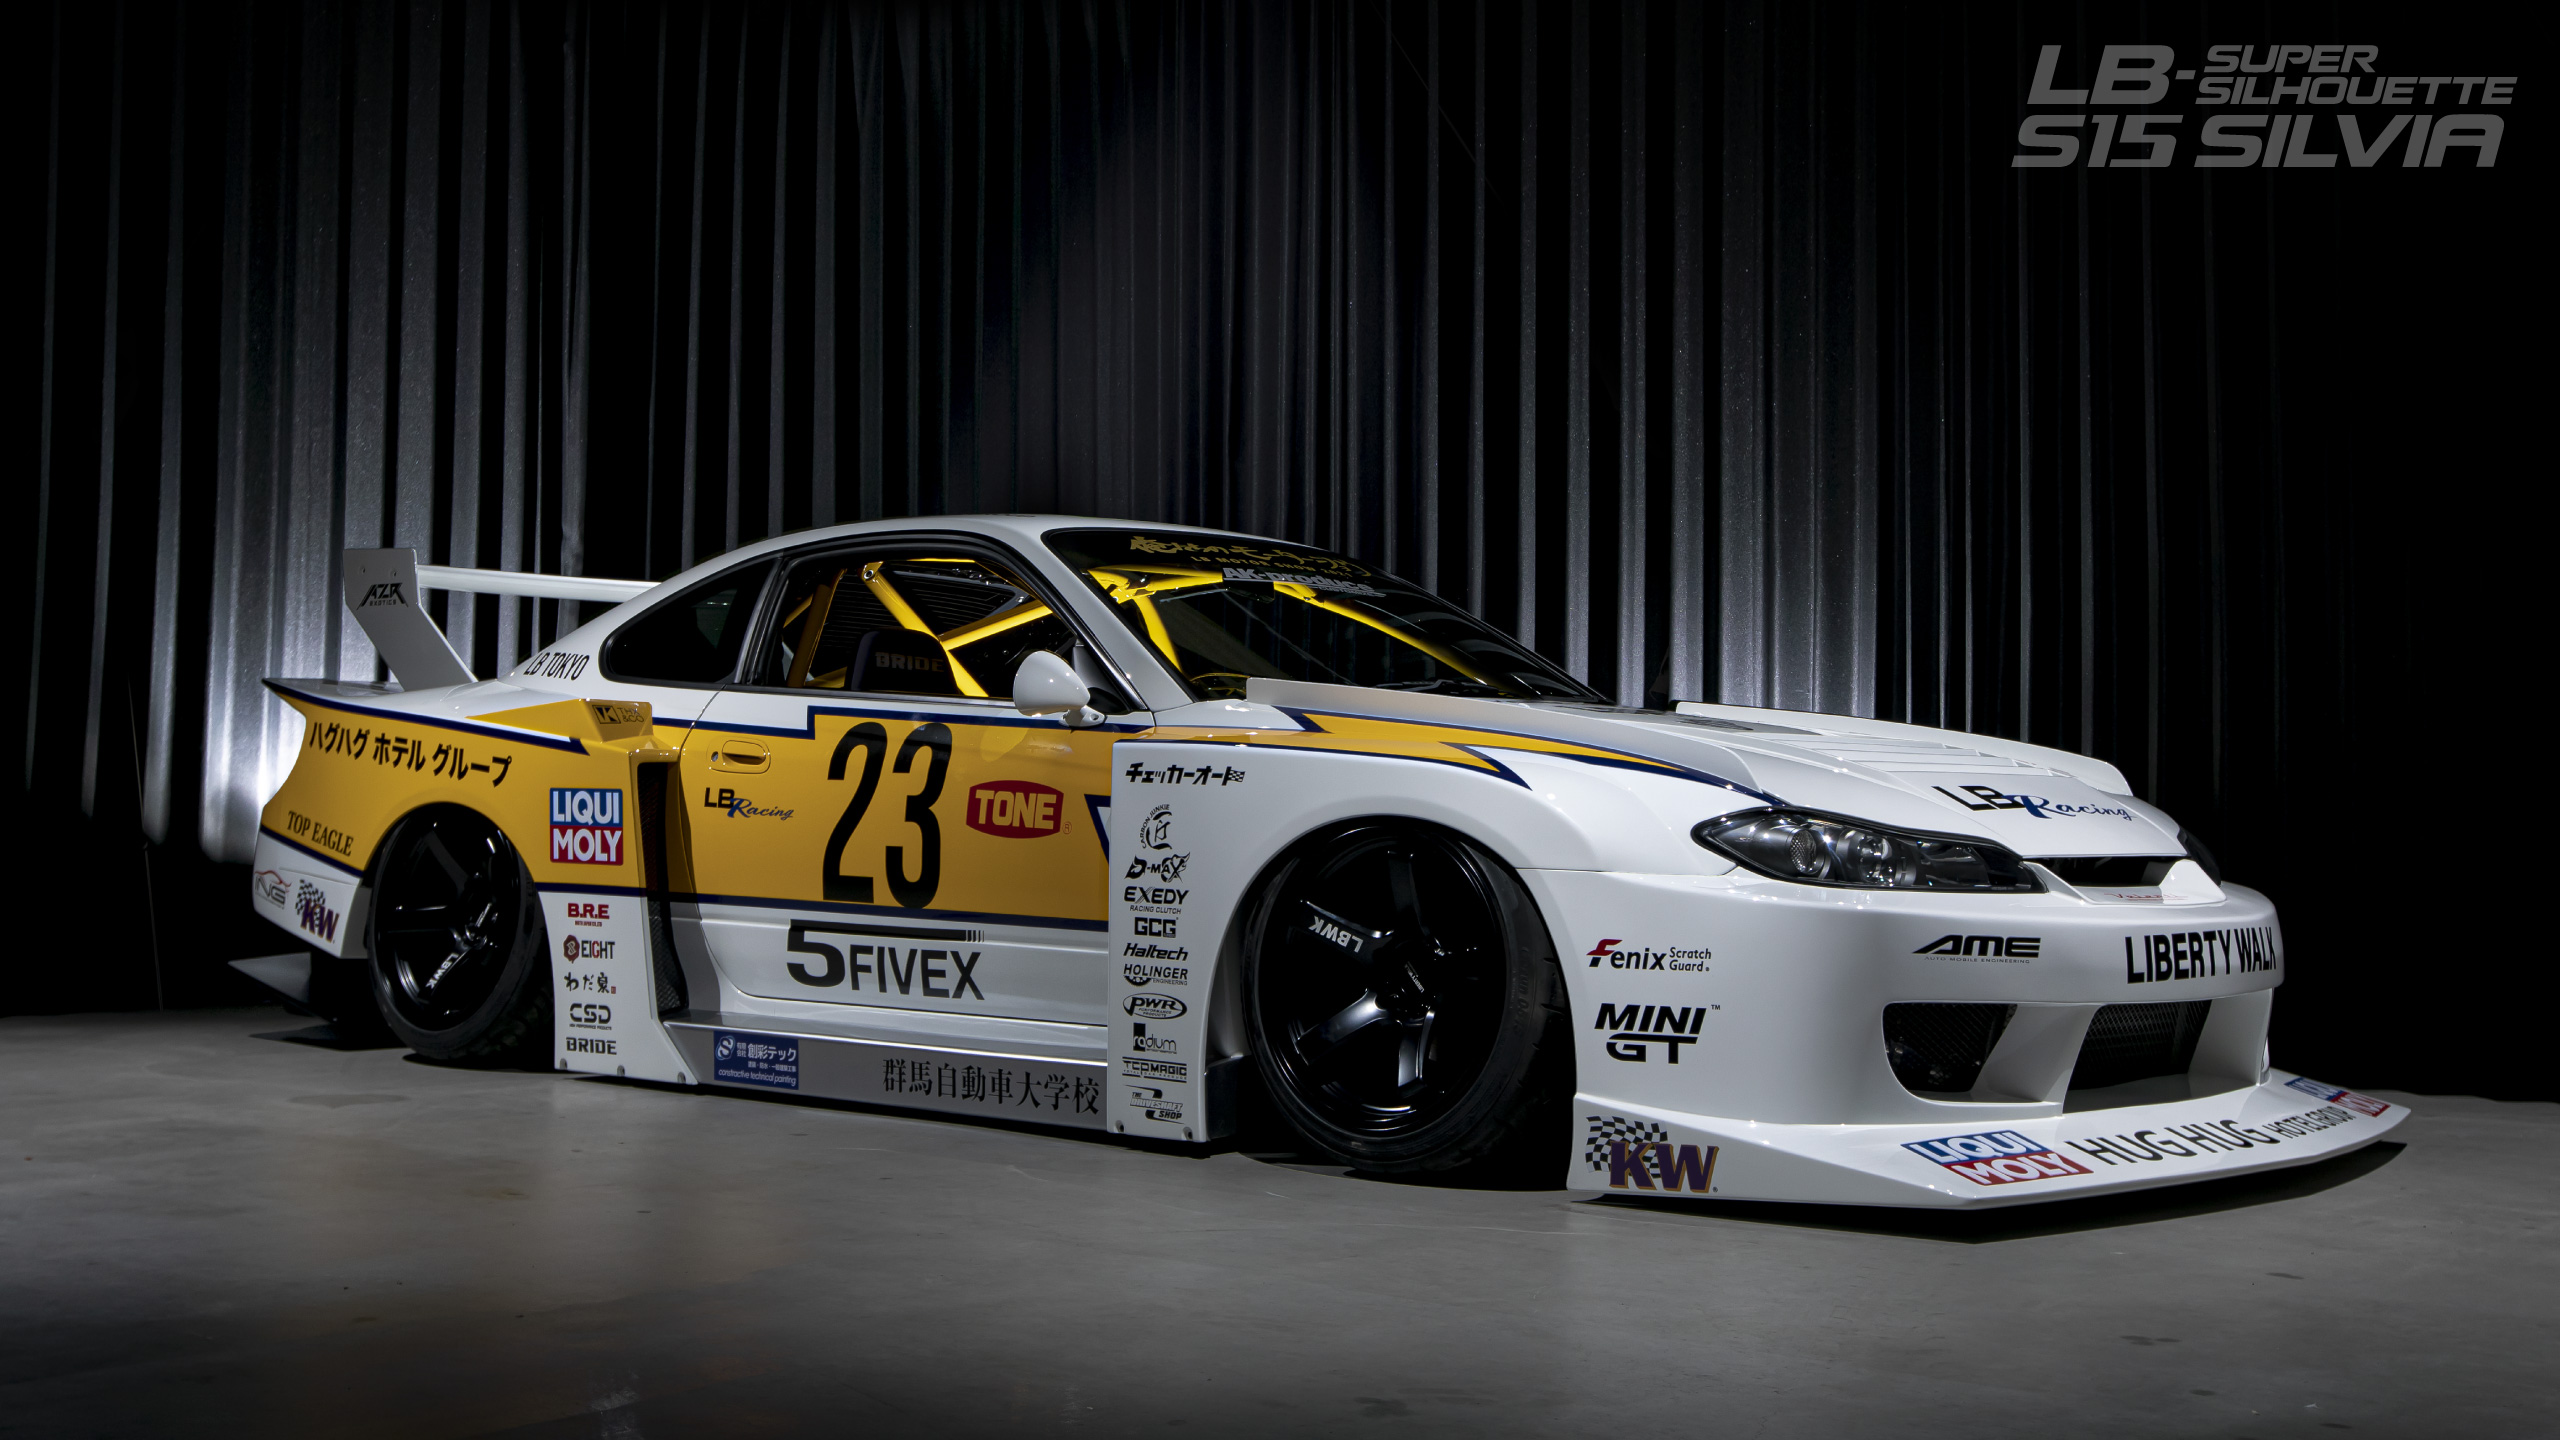 Lb super silhouette nissan silvia s background images and wallpapers â yl computing